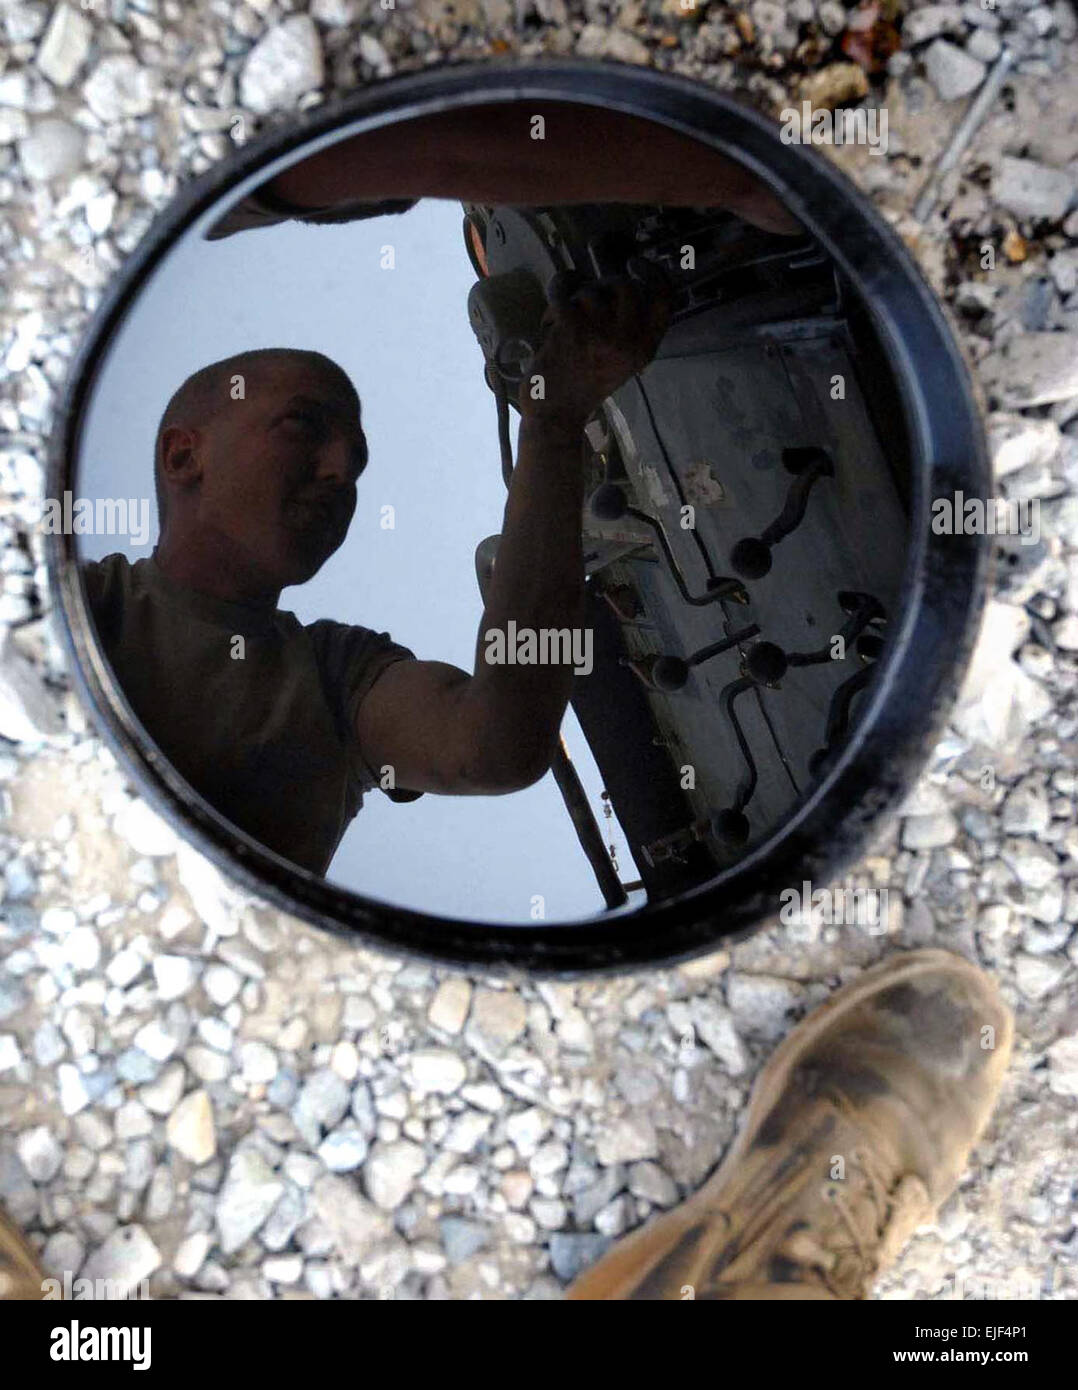 071023-A-3726C-013- The image of Spc. William P. Jones, a light wheel vehicle mechanic from Company B, 173rd Brigade Support Battalion Airborne, reflects in an oil pan as he works on a wrecker in the company motor pool at Forward Operating Base Fenty, Afghanistan on Oct. 23.  2nd Lt. Monika Comeaux Stock Photo